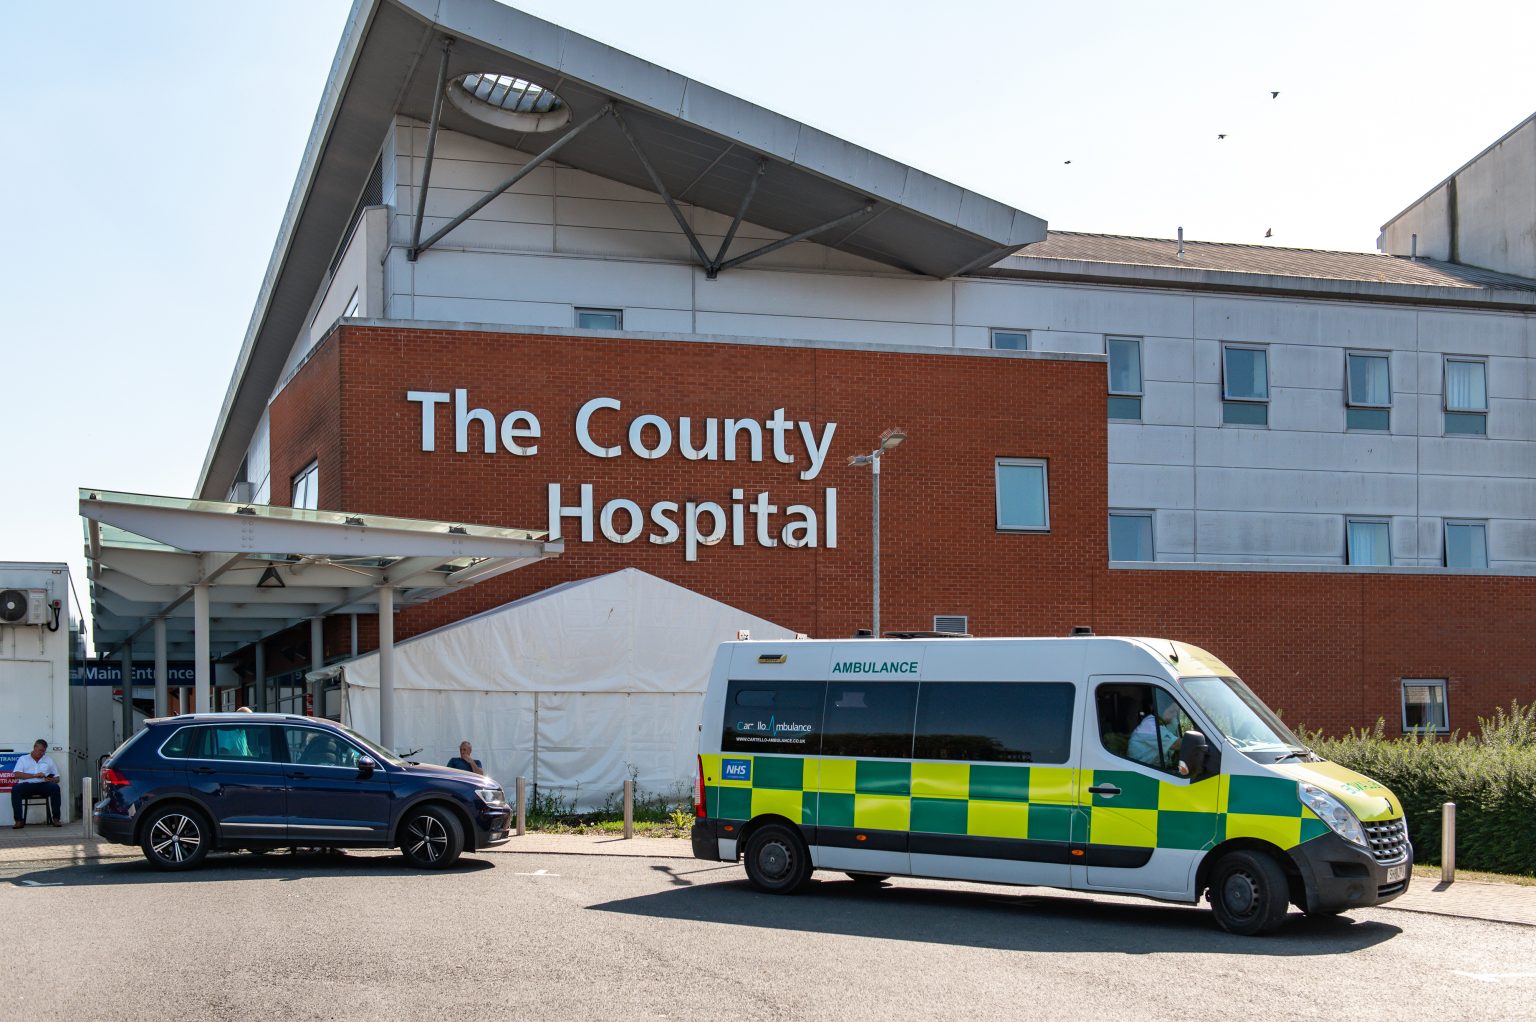 NEWS | Number of patients with COVID-19 at hospital in Herefordshire rises as infection rates hit record levels